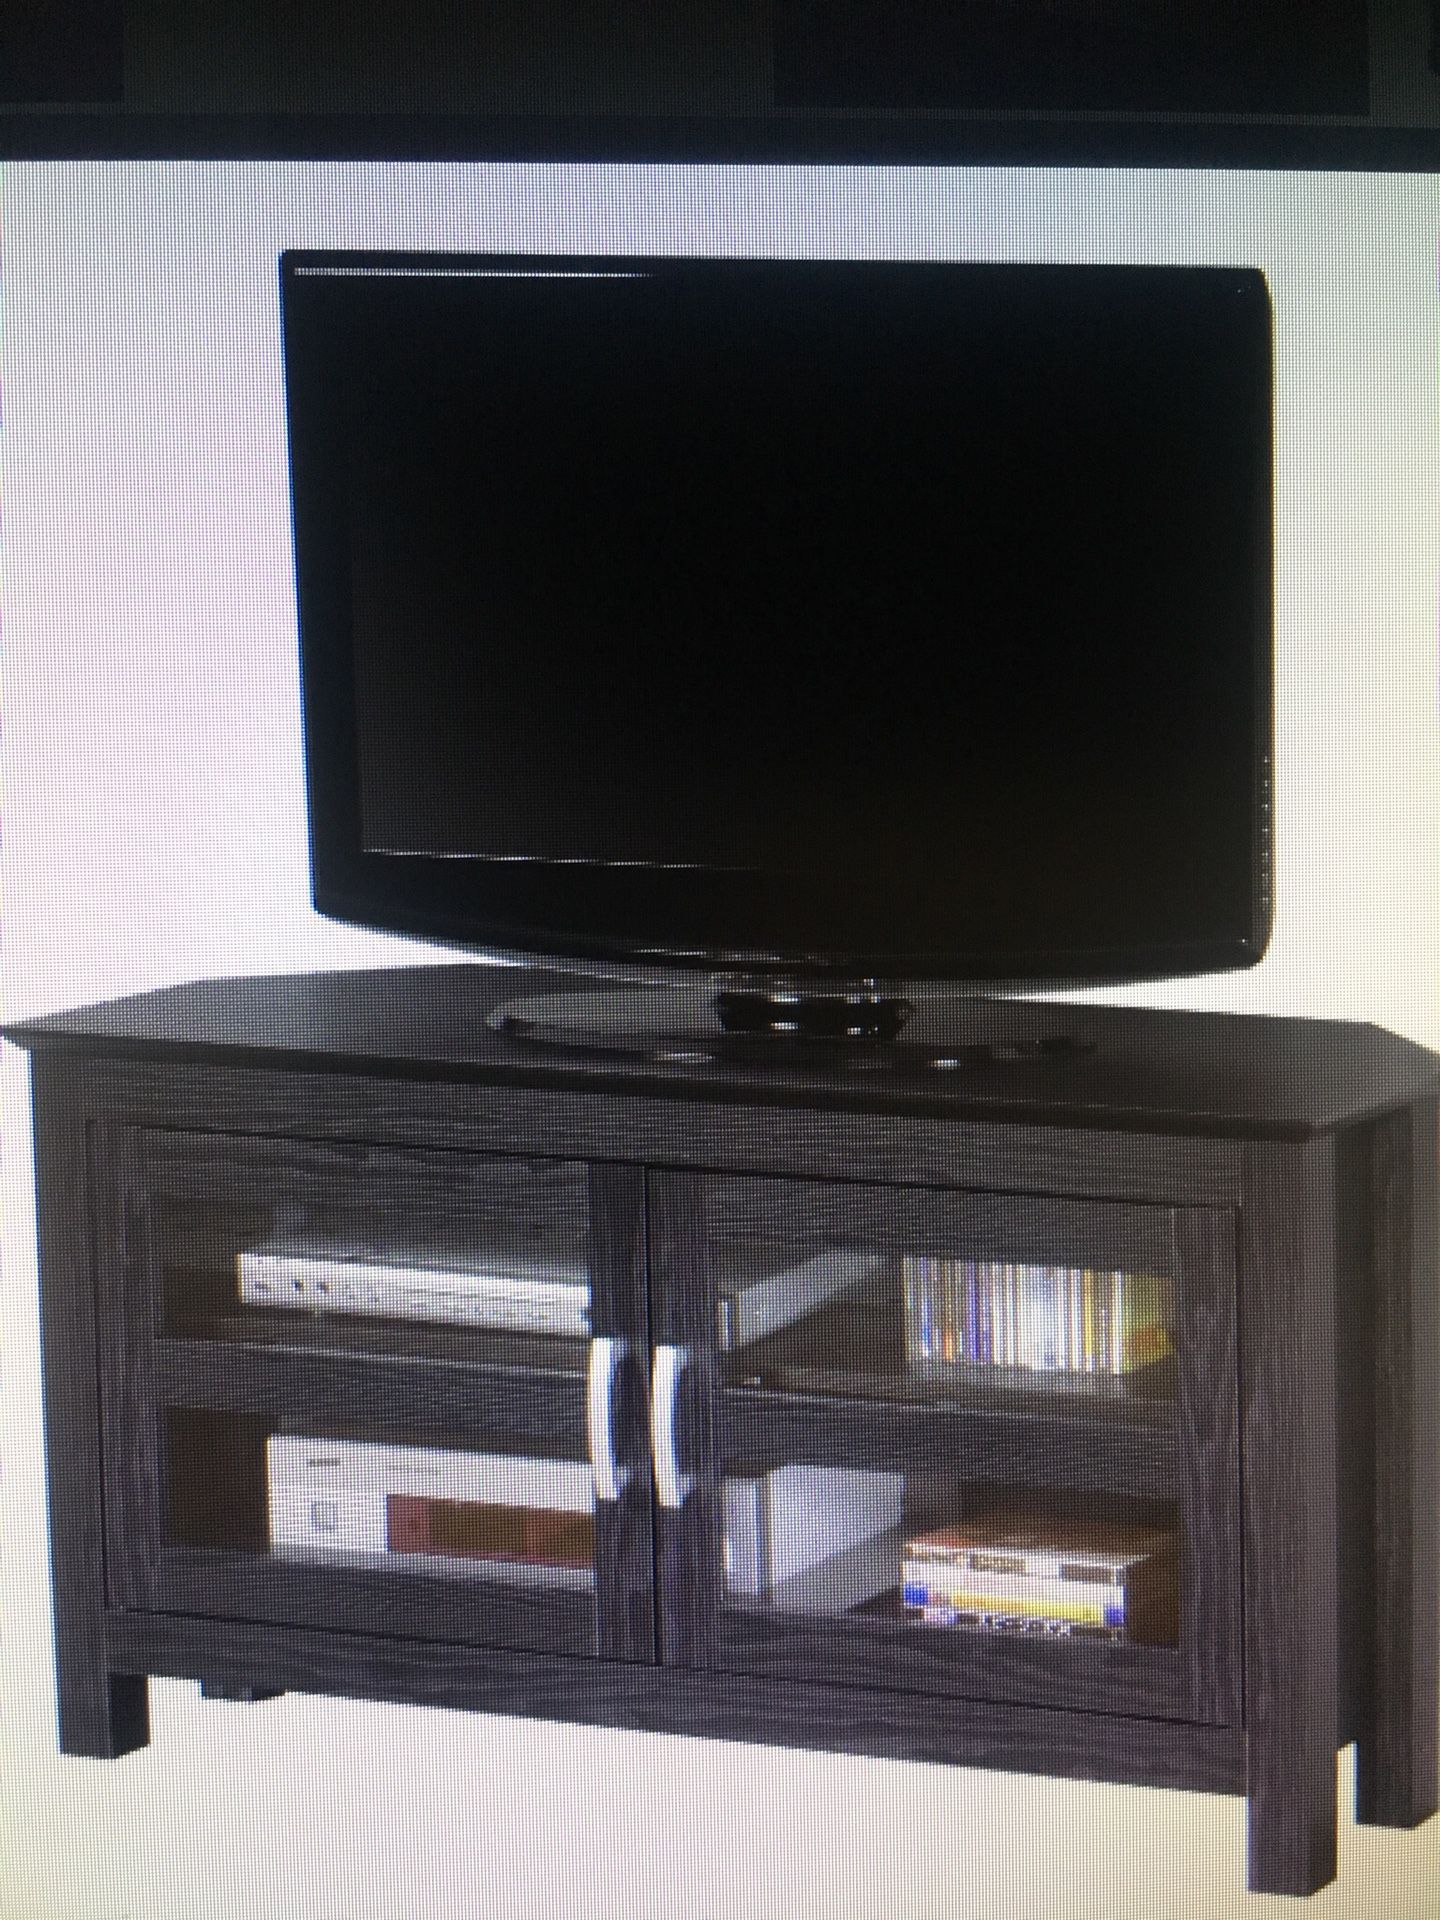 TV stand for sale $40